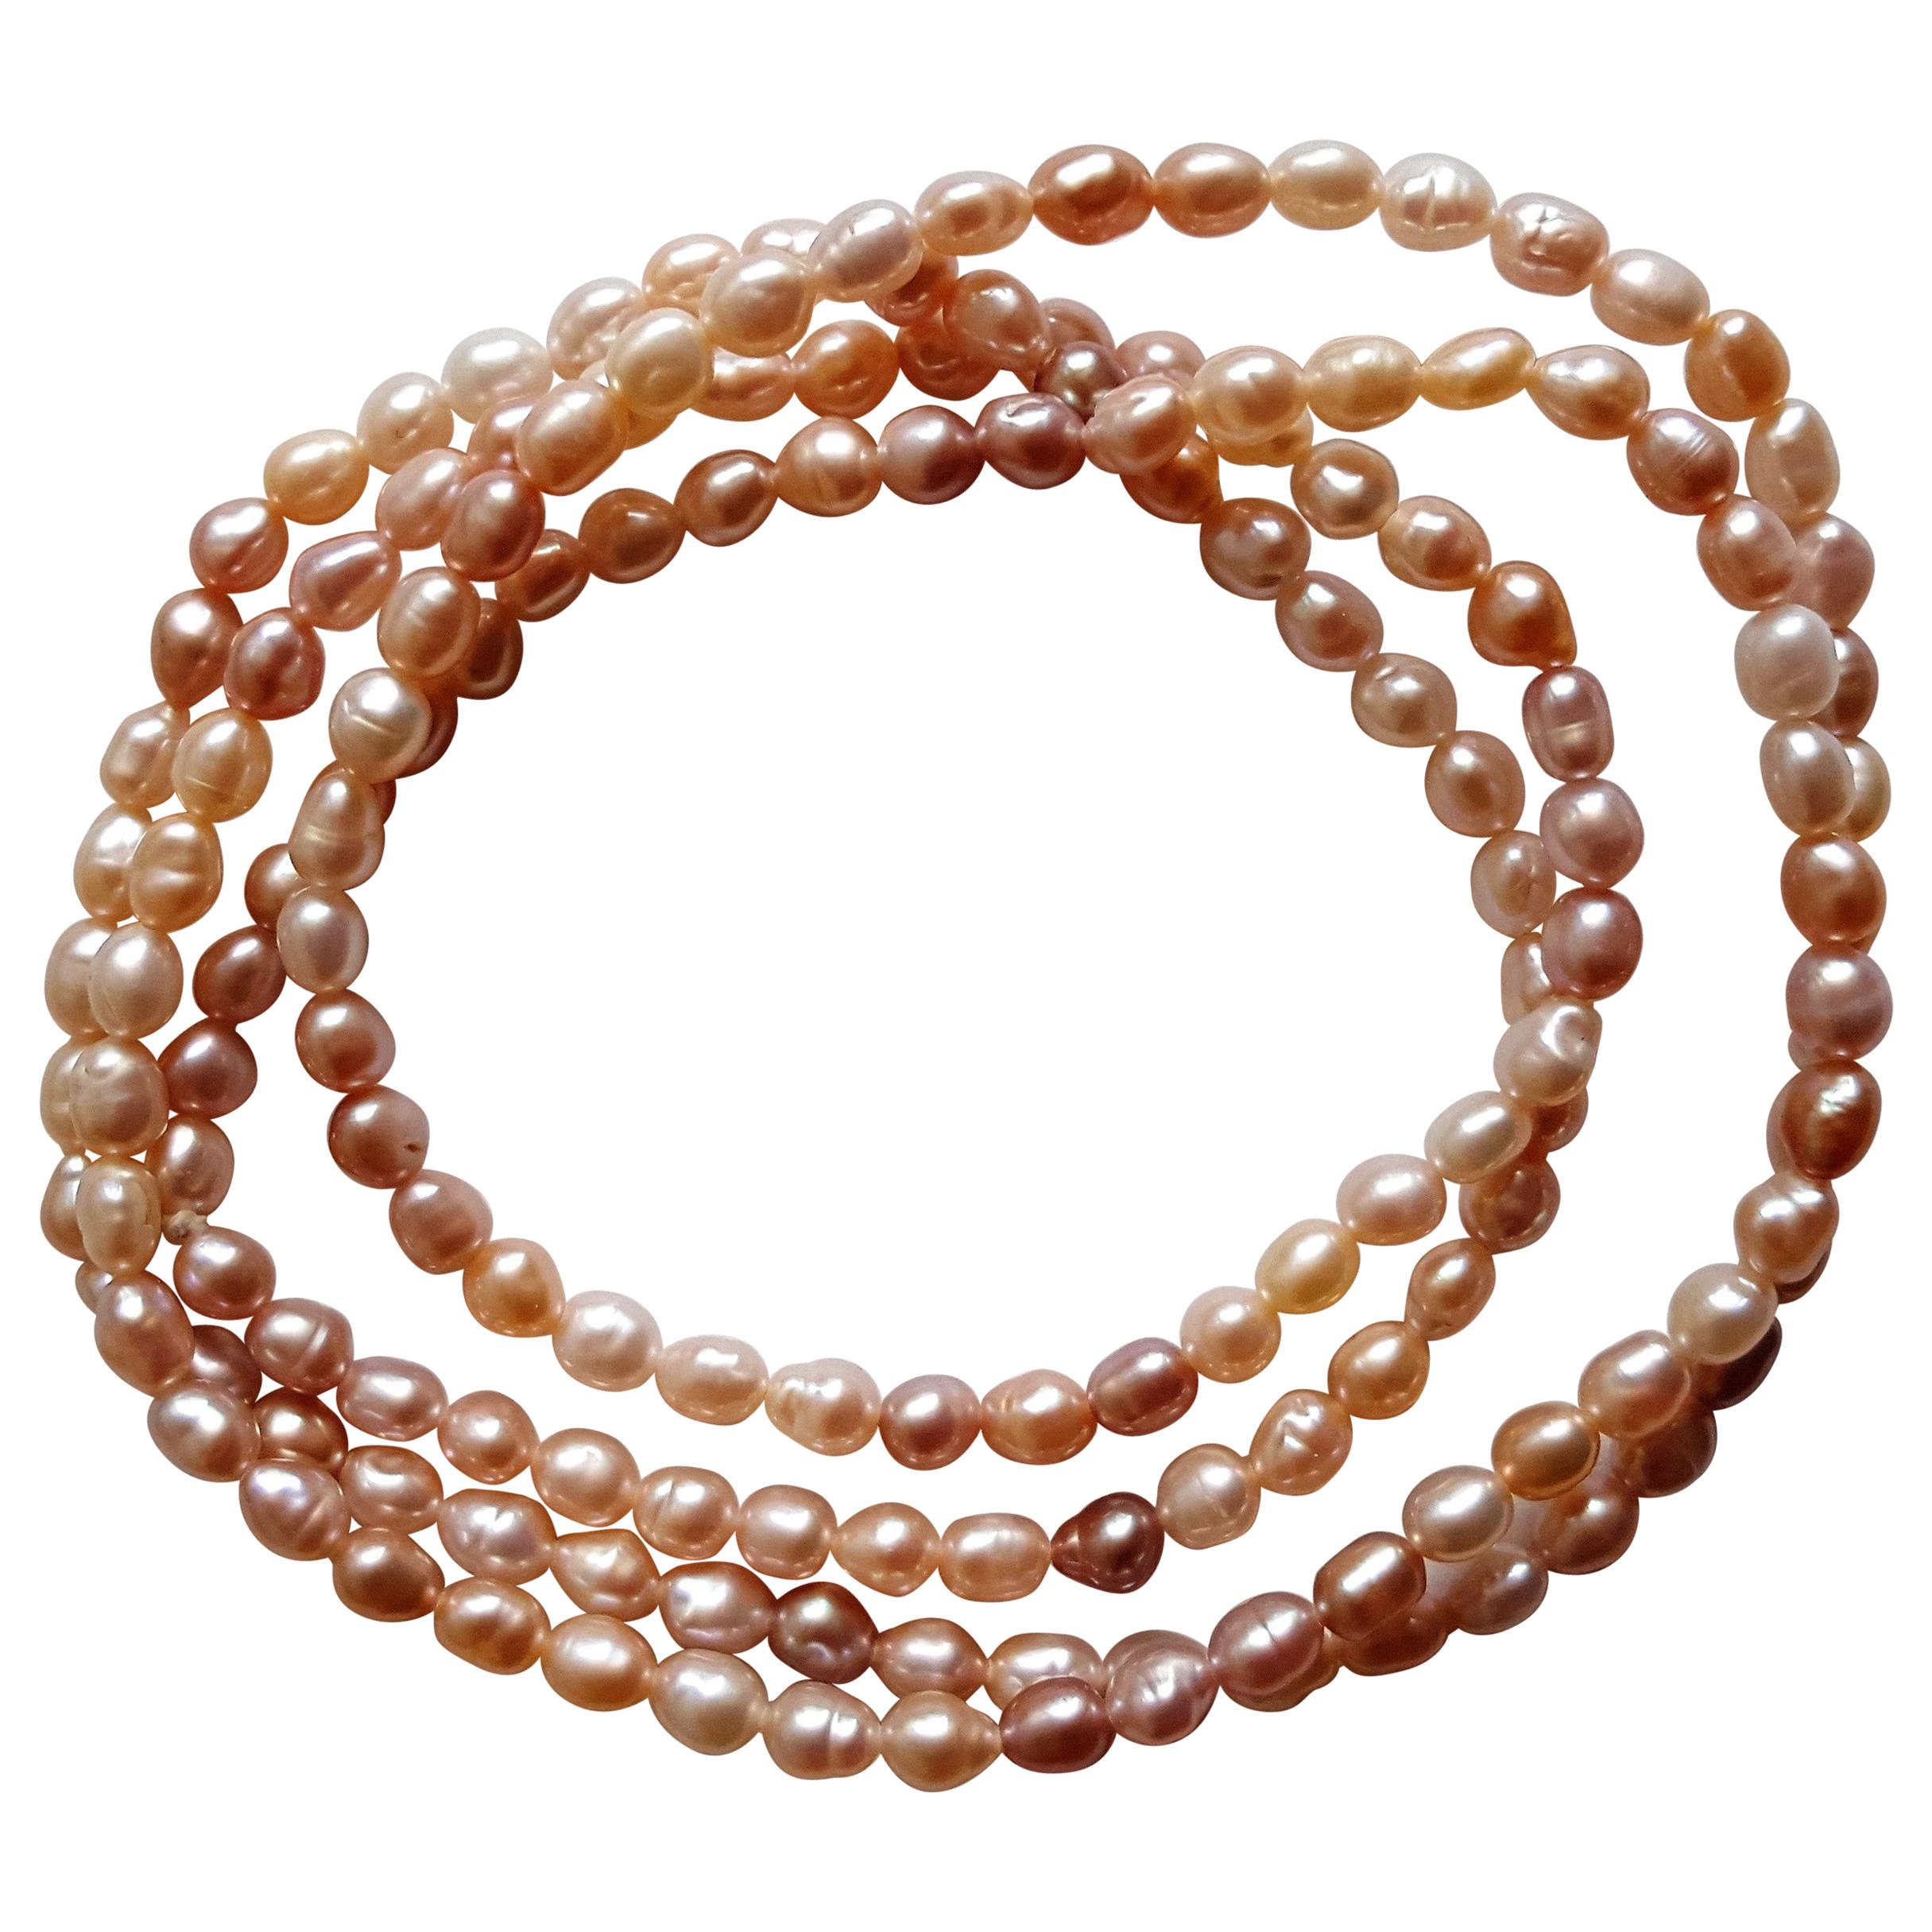 Tourmaline Bead and Cultured Freshwater Stick Pearl Necklace 24-inch Length